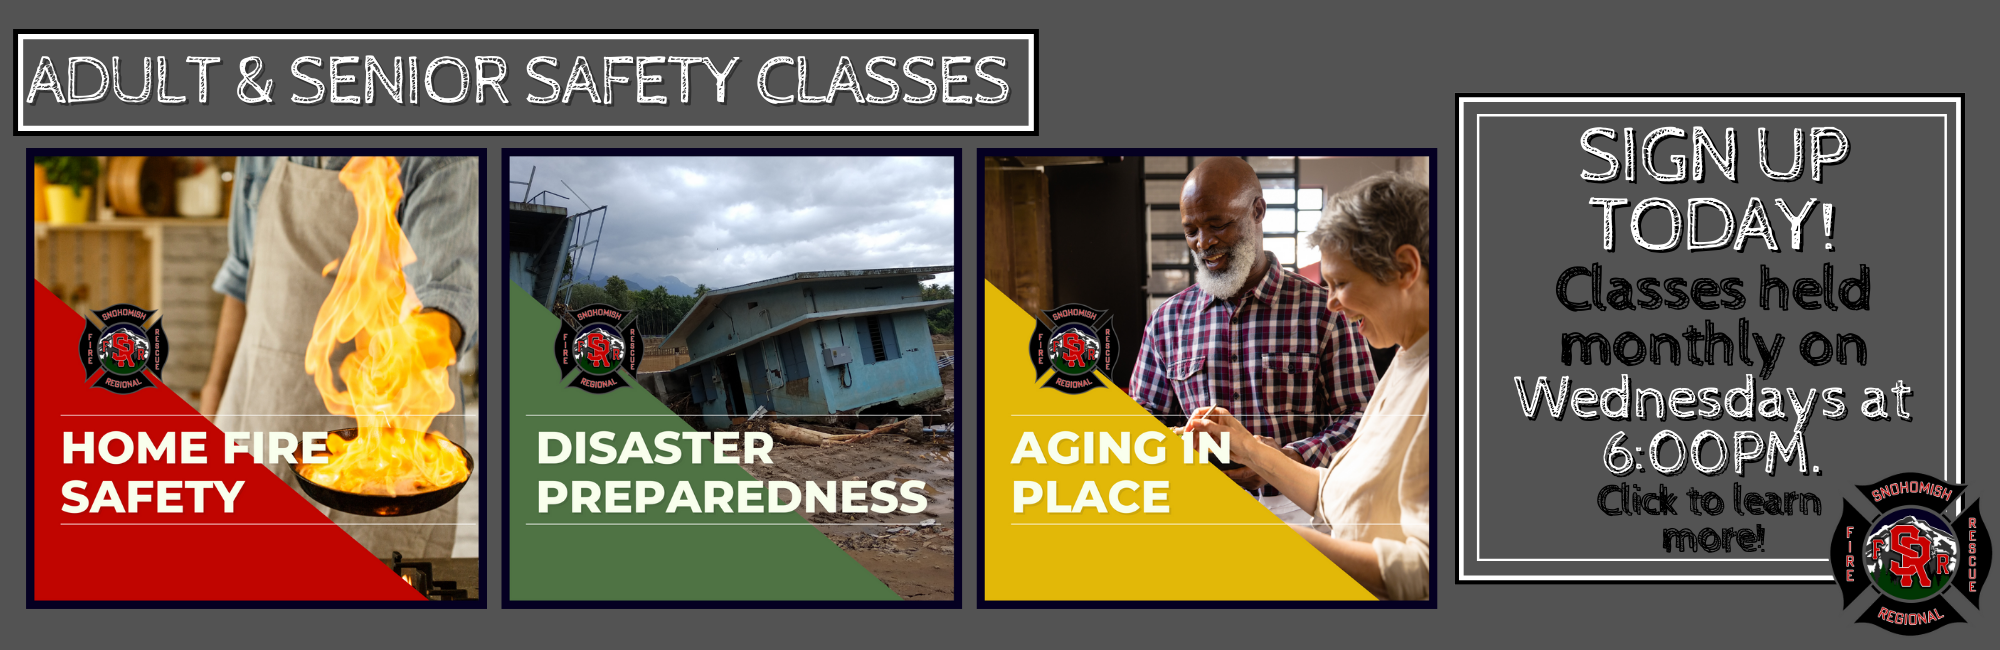 adult-senior-safety-classes.png